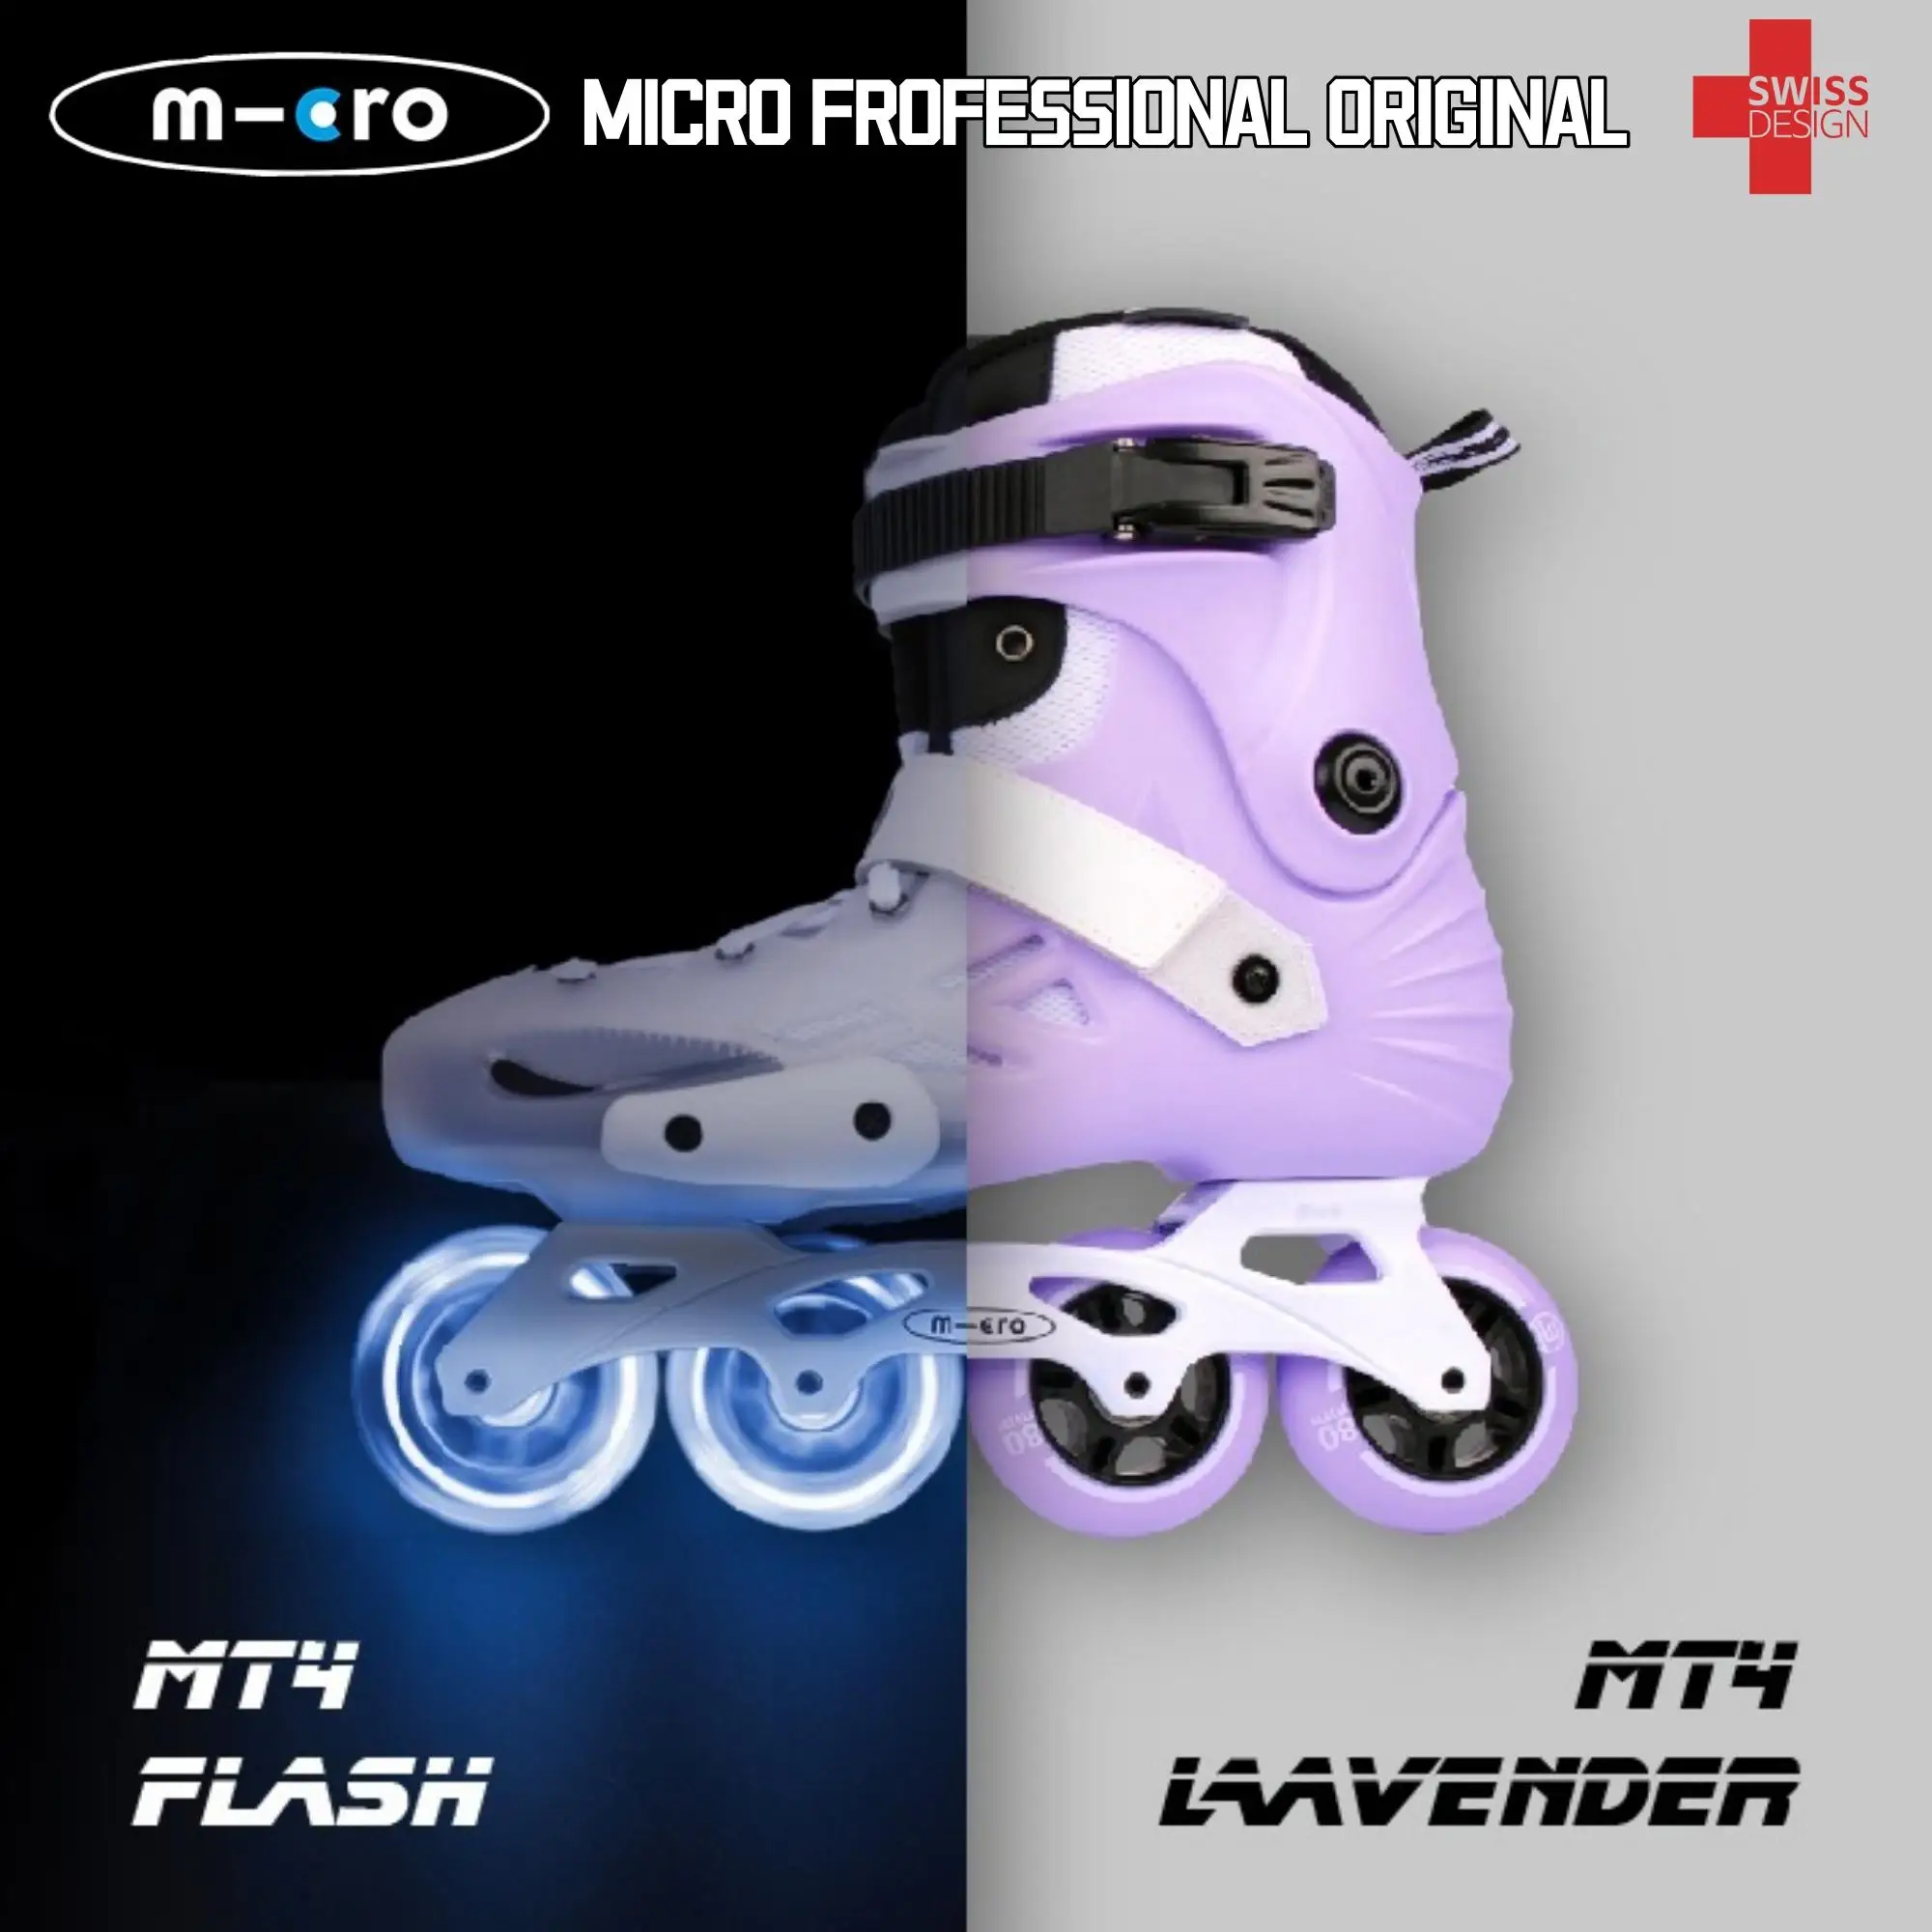 MICRO SKATE m-cro MT4 Lavender,URBAN and Recreation,80mm 85A,Style and Comfort Inline Skates for Beginner